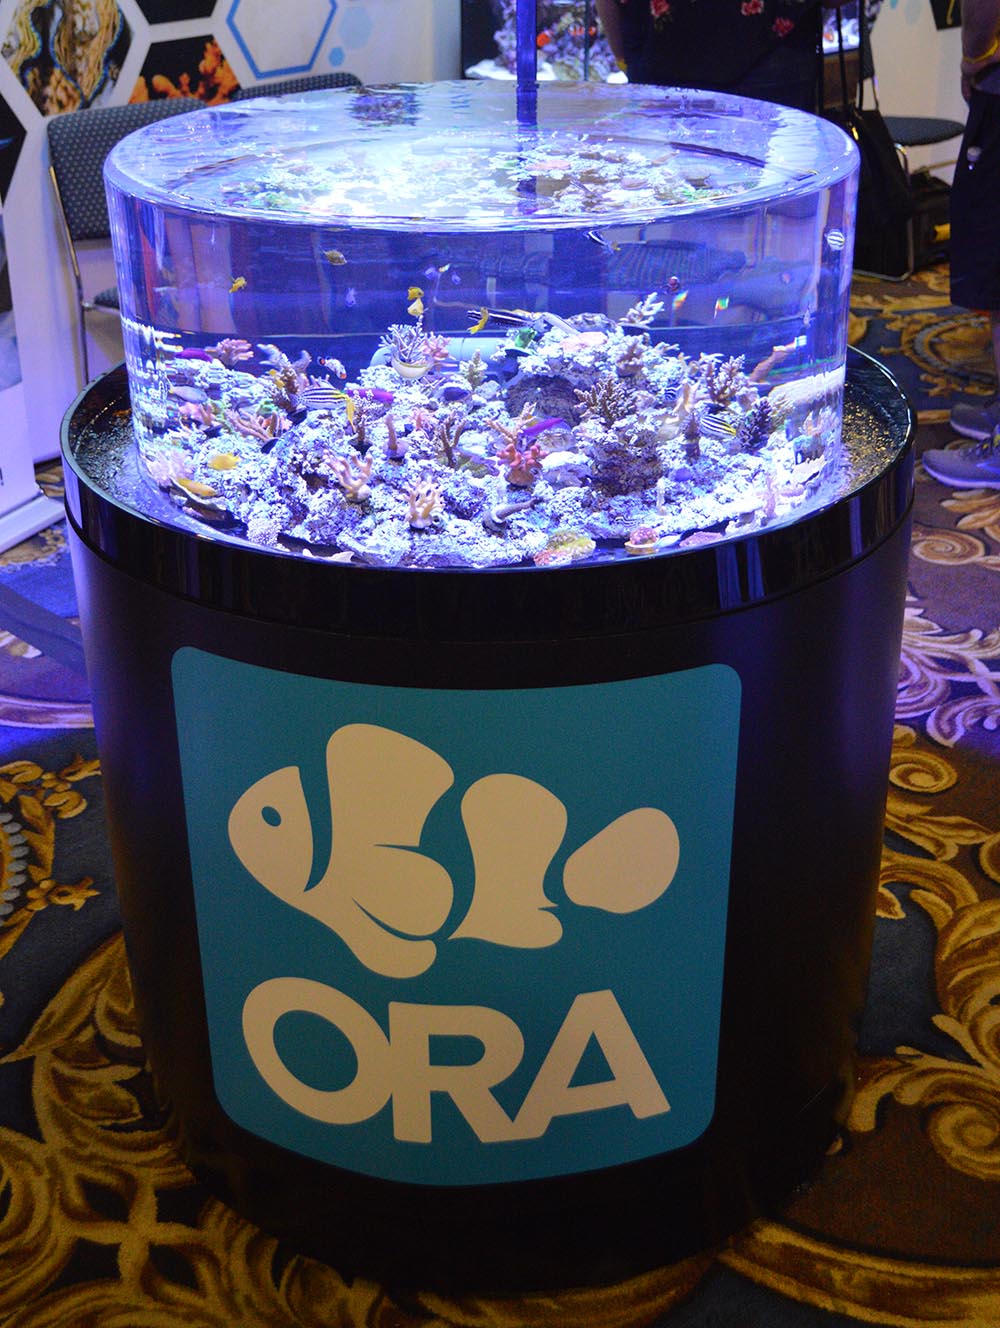 This Zero Edge is a perennial display by Oceans, Reefs and Aquariums (ORA).